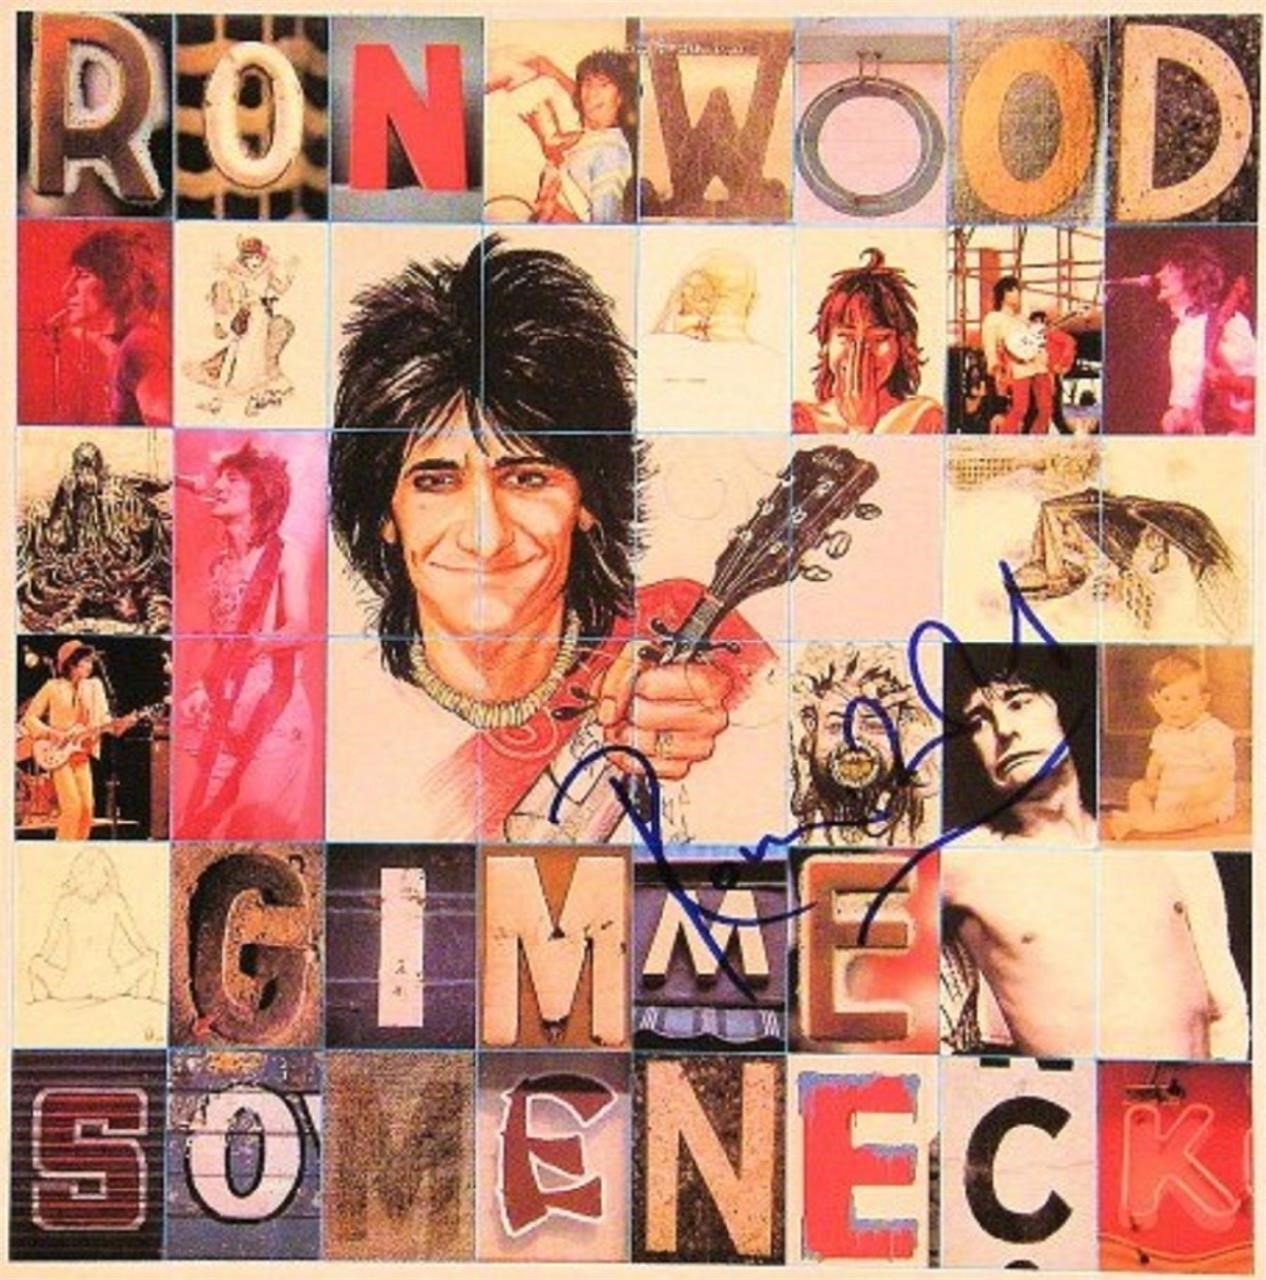 Ron Wood signed "Gimme Some Neck" album